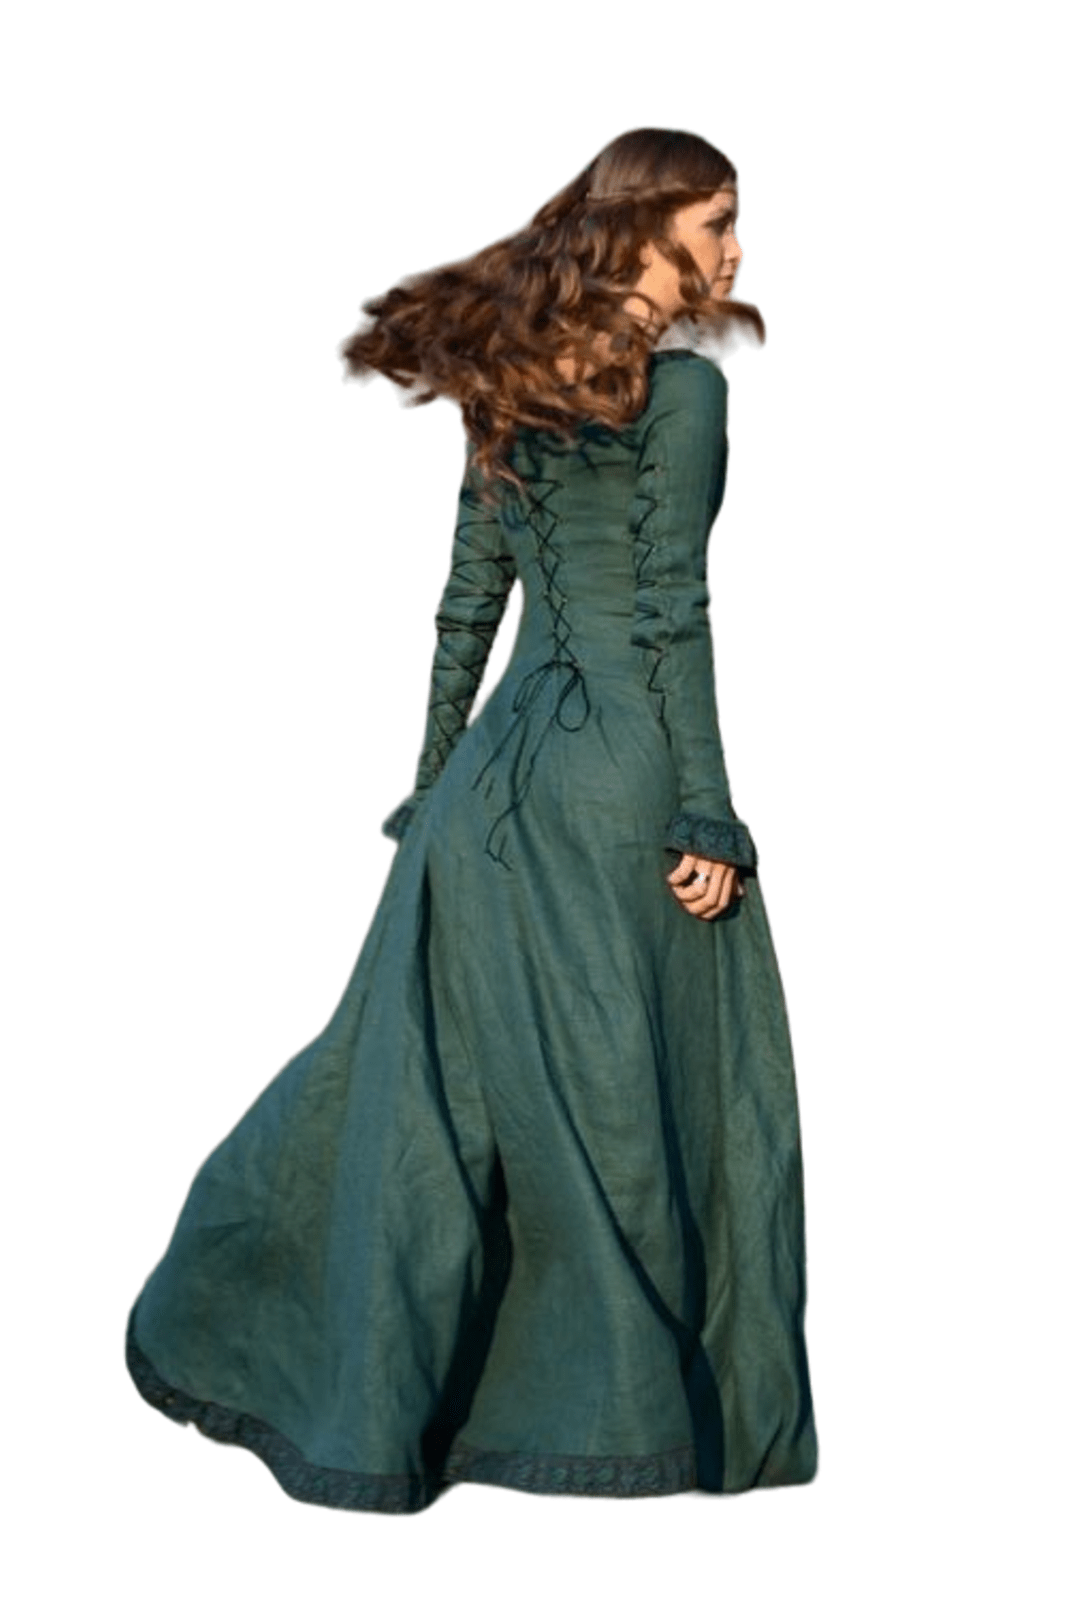 Green Medieval Dress with Trim